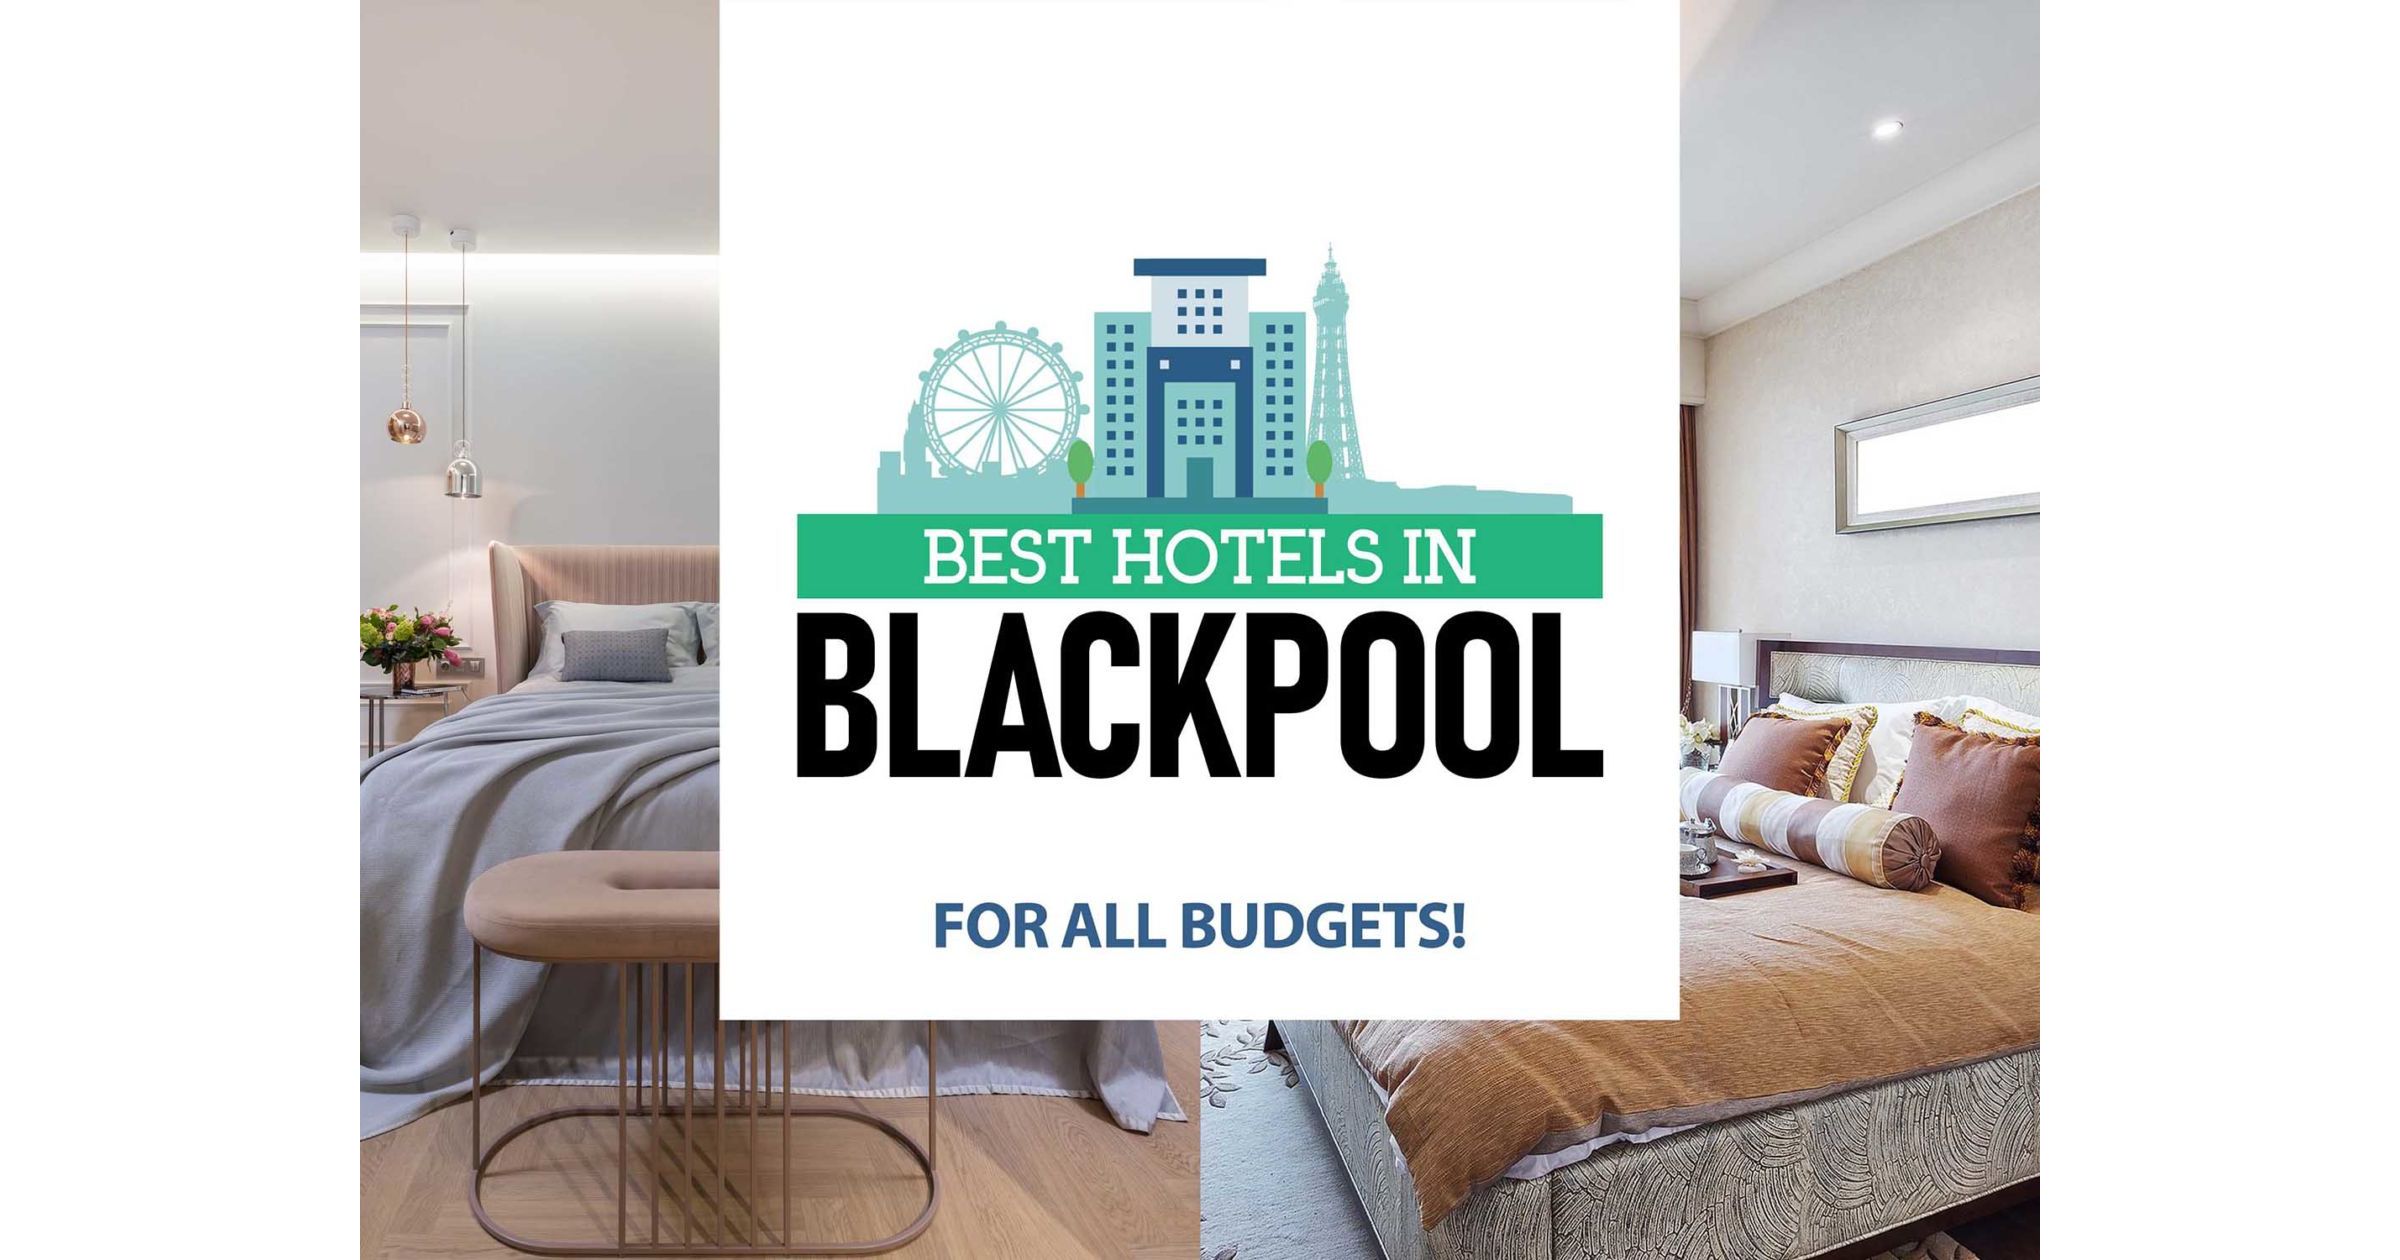 Best Hotels in Blackpool